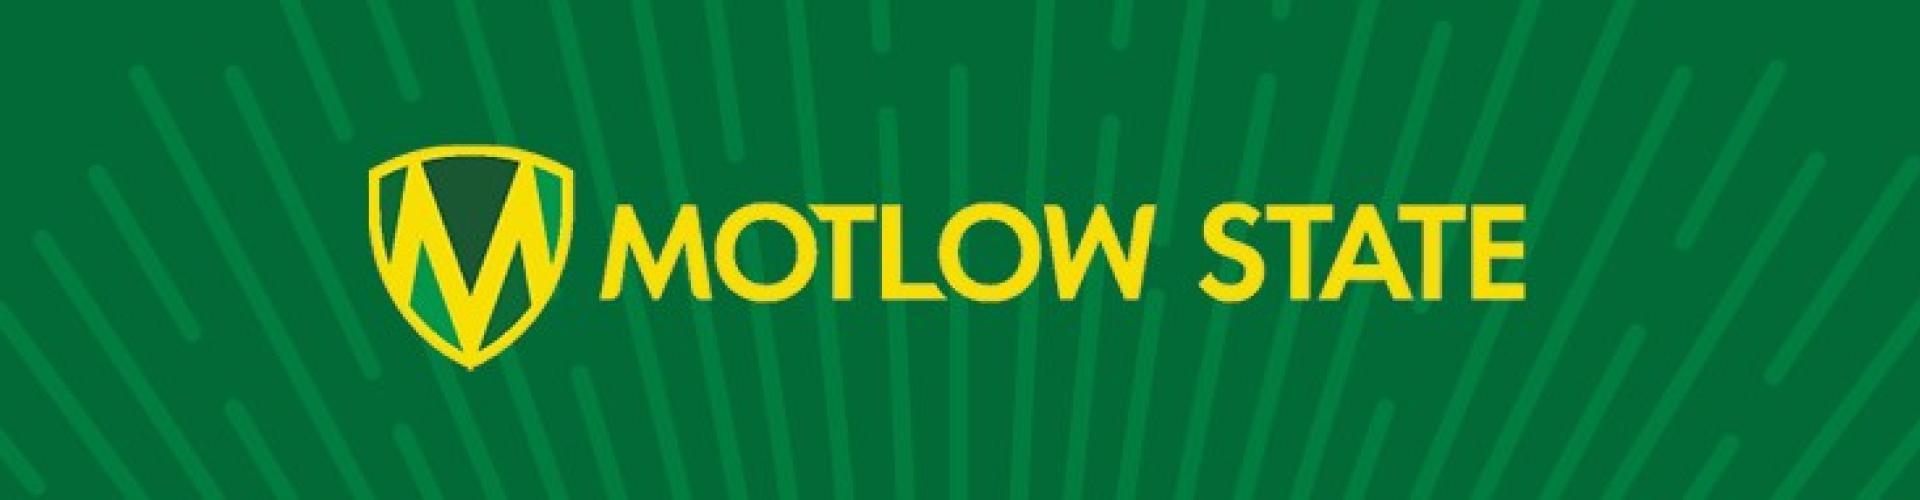 Motlow State Community College cover